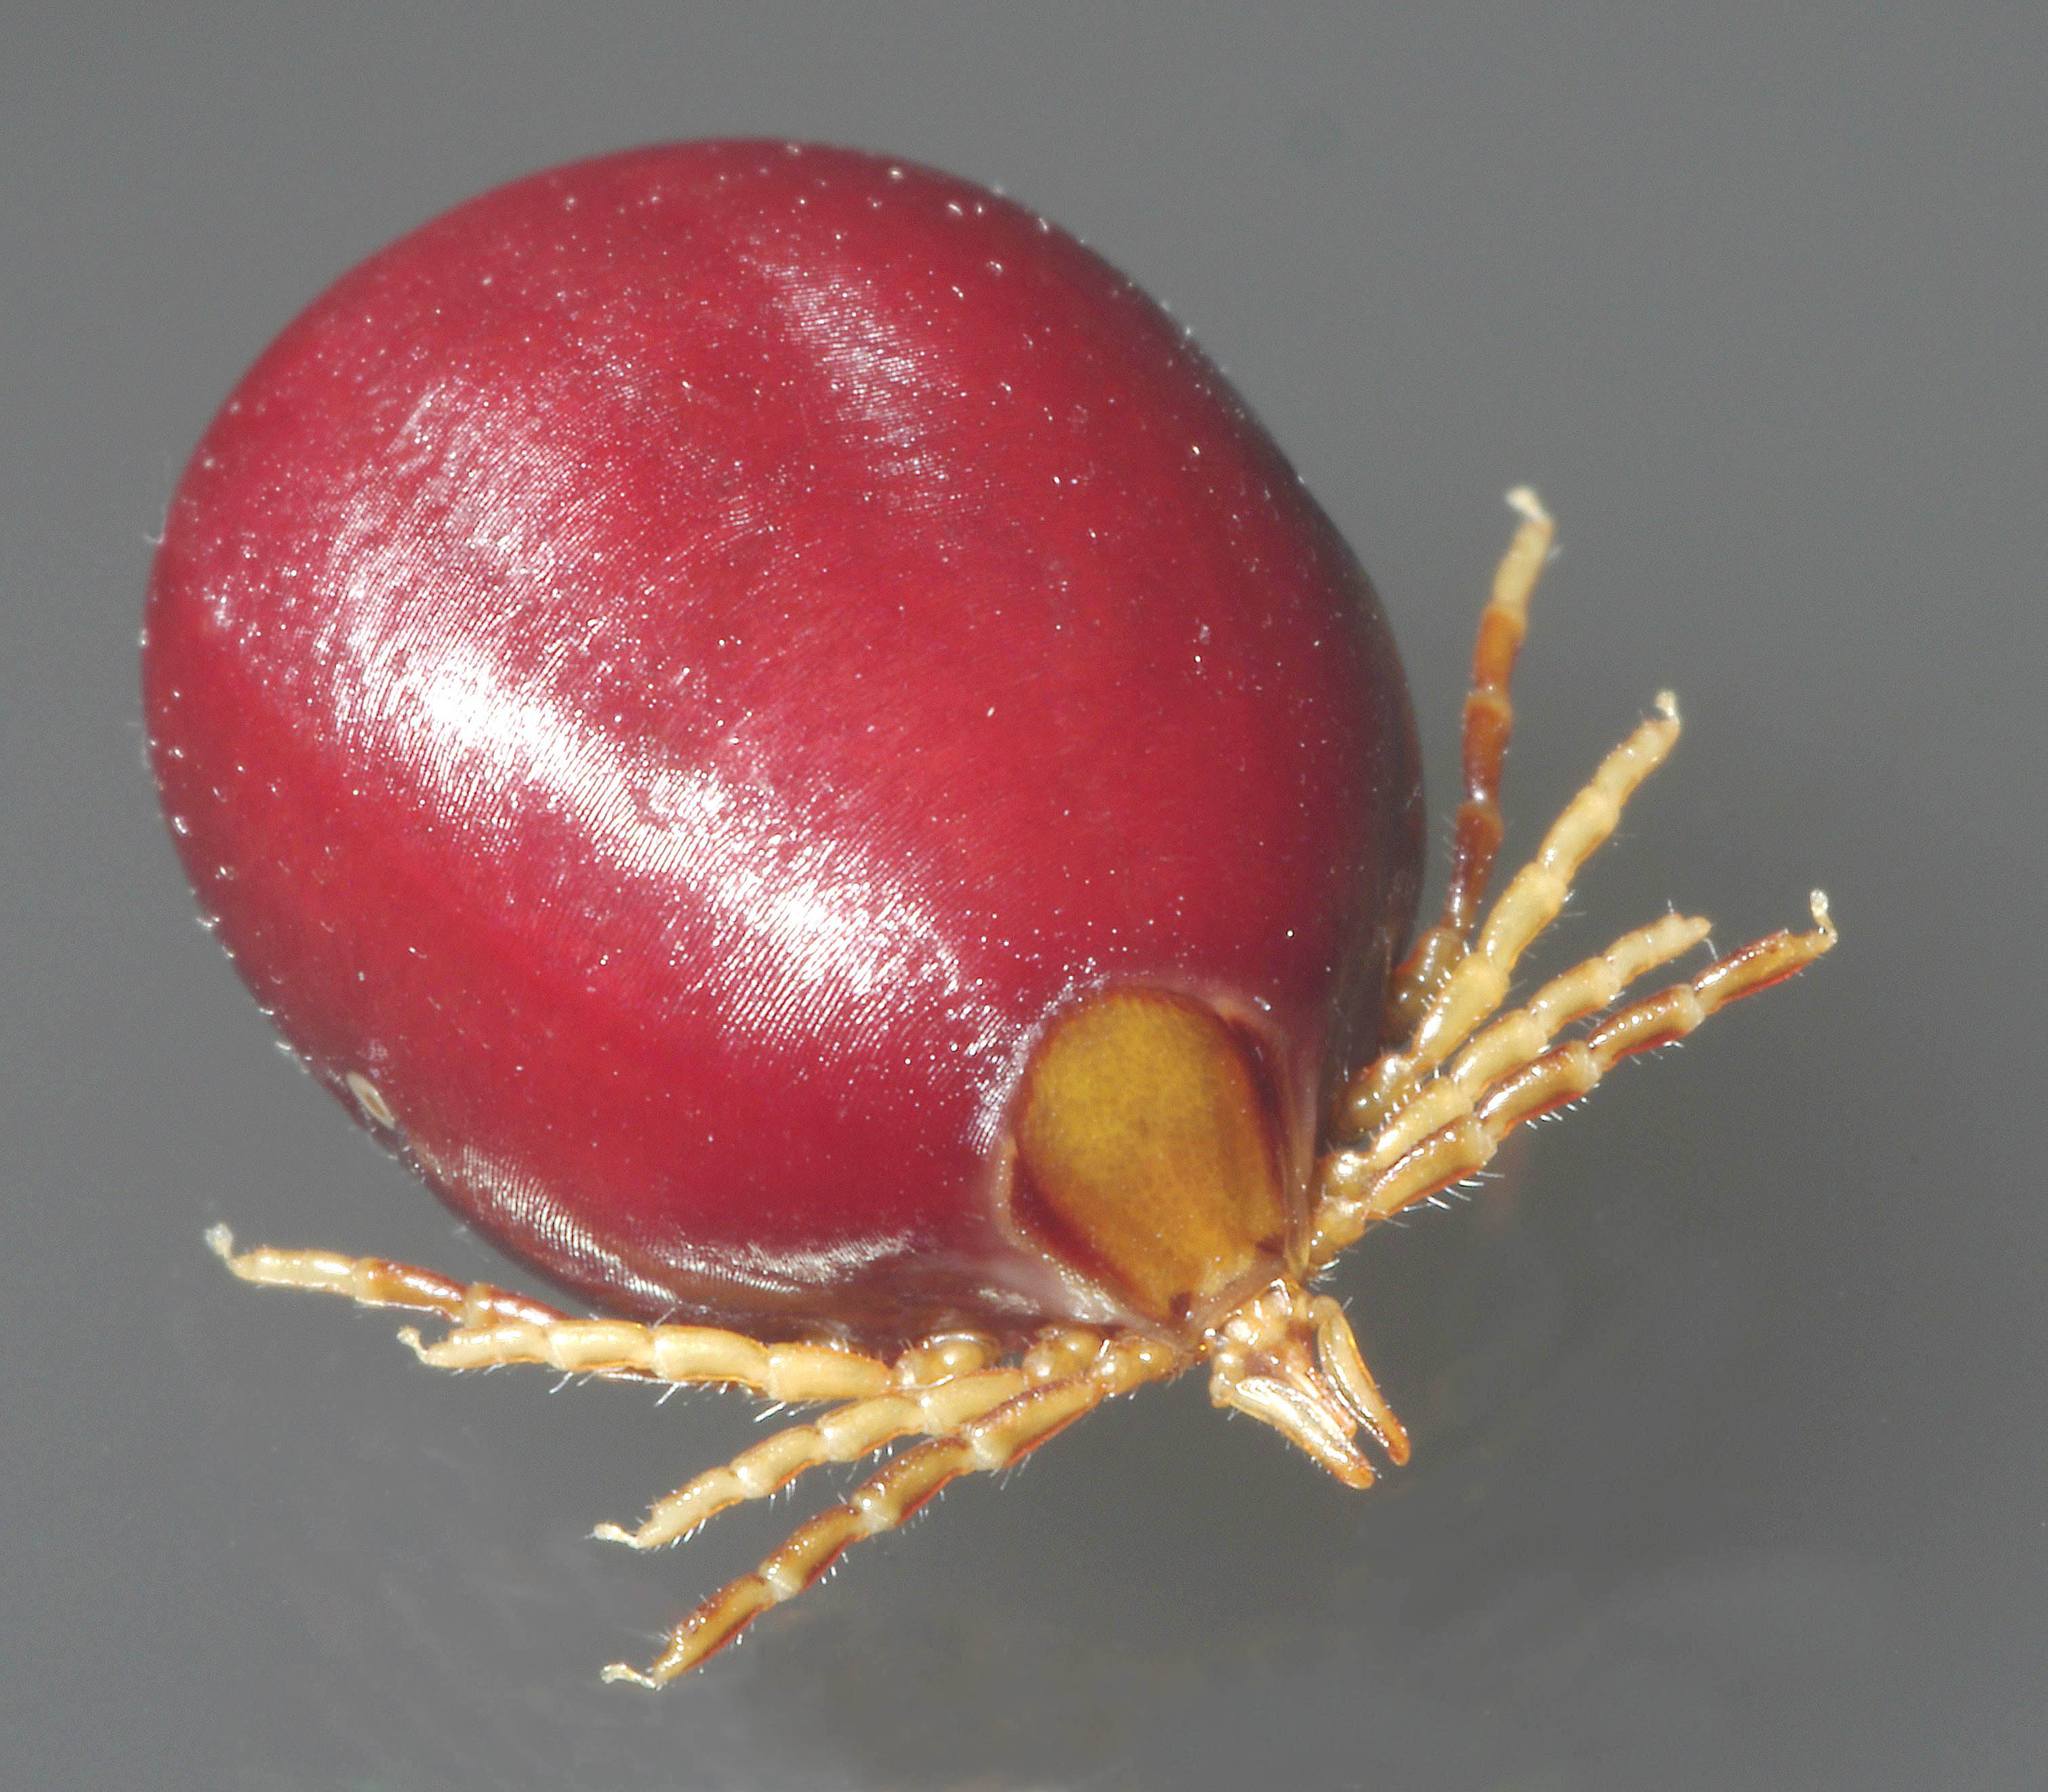 Ixodes holocyclus causes tick paralysis in Australian pets. The Spatial Epidemiology Lab (SpatialEpi) is a medical geography and disease ecology research group based at the University of Queensland that is developing integrated biosecurity management tools for monitoring tick paralysis risk in Australia.